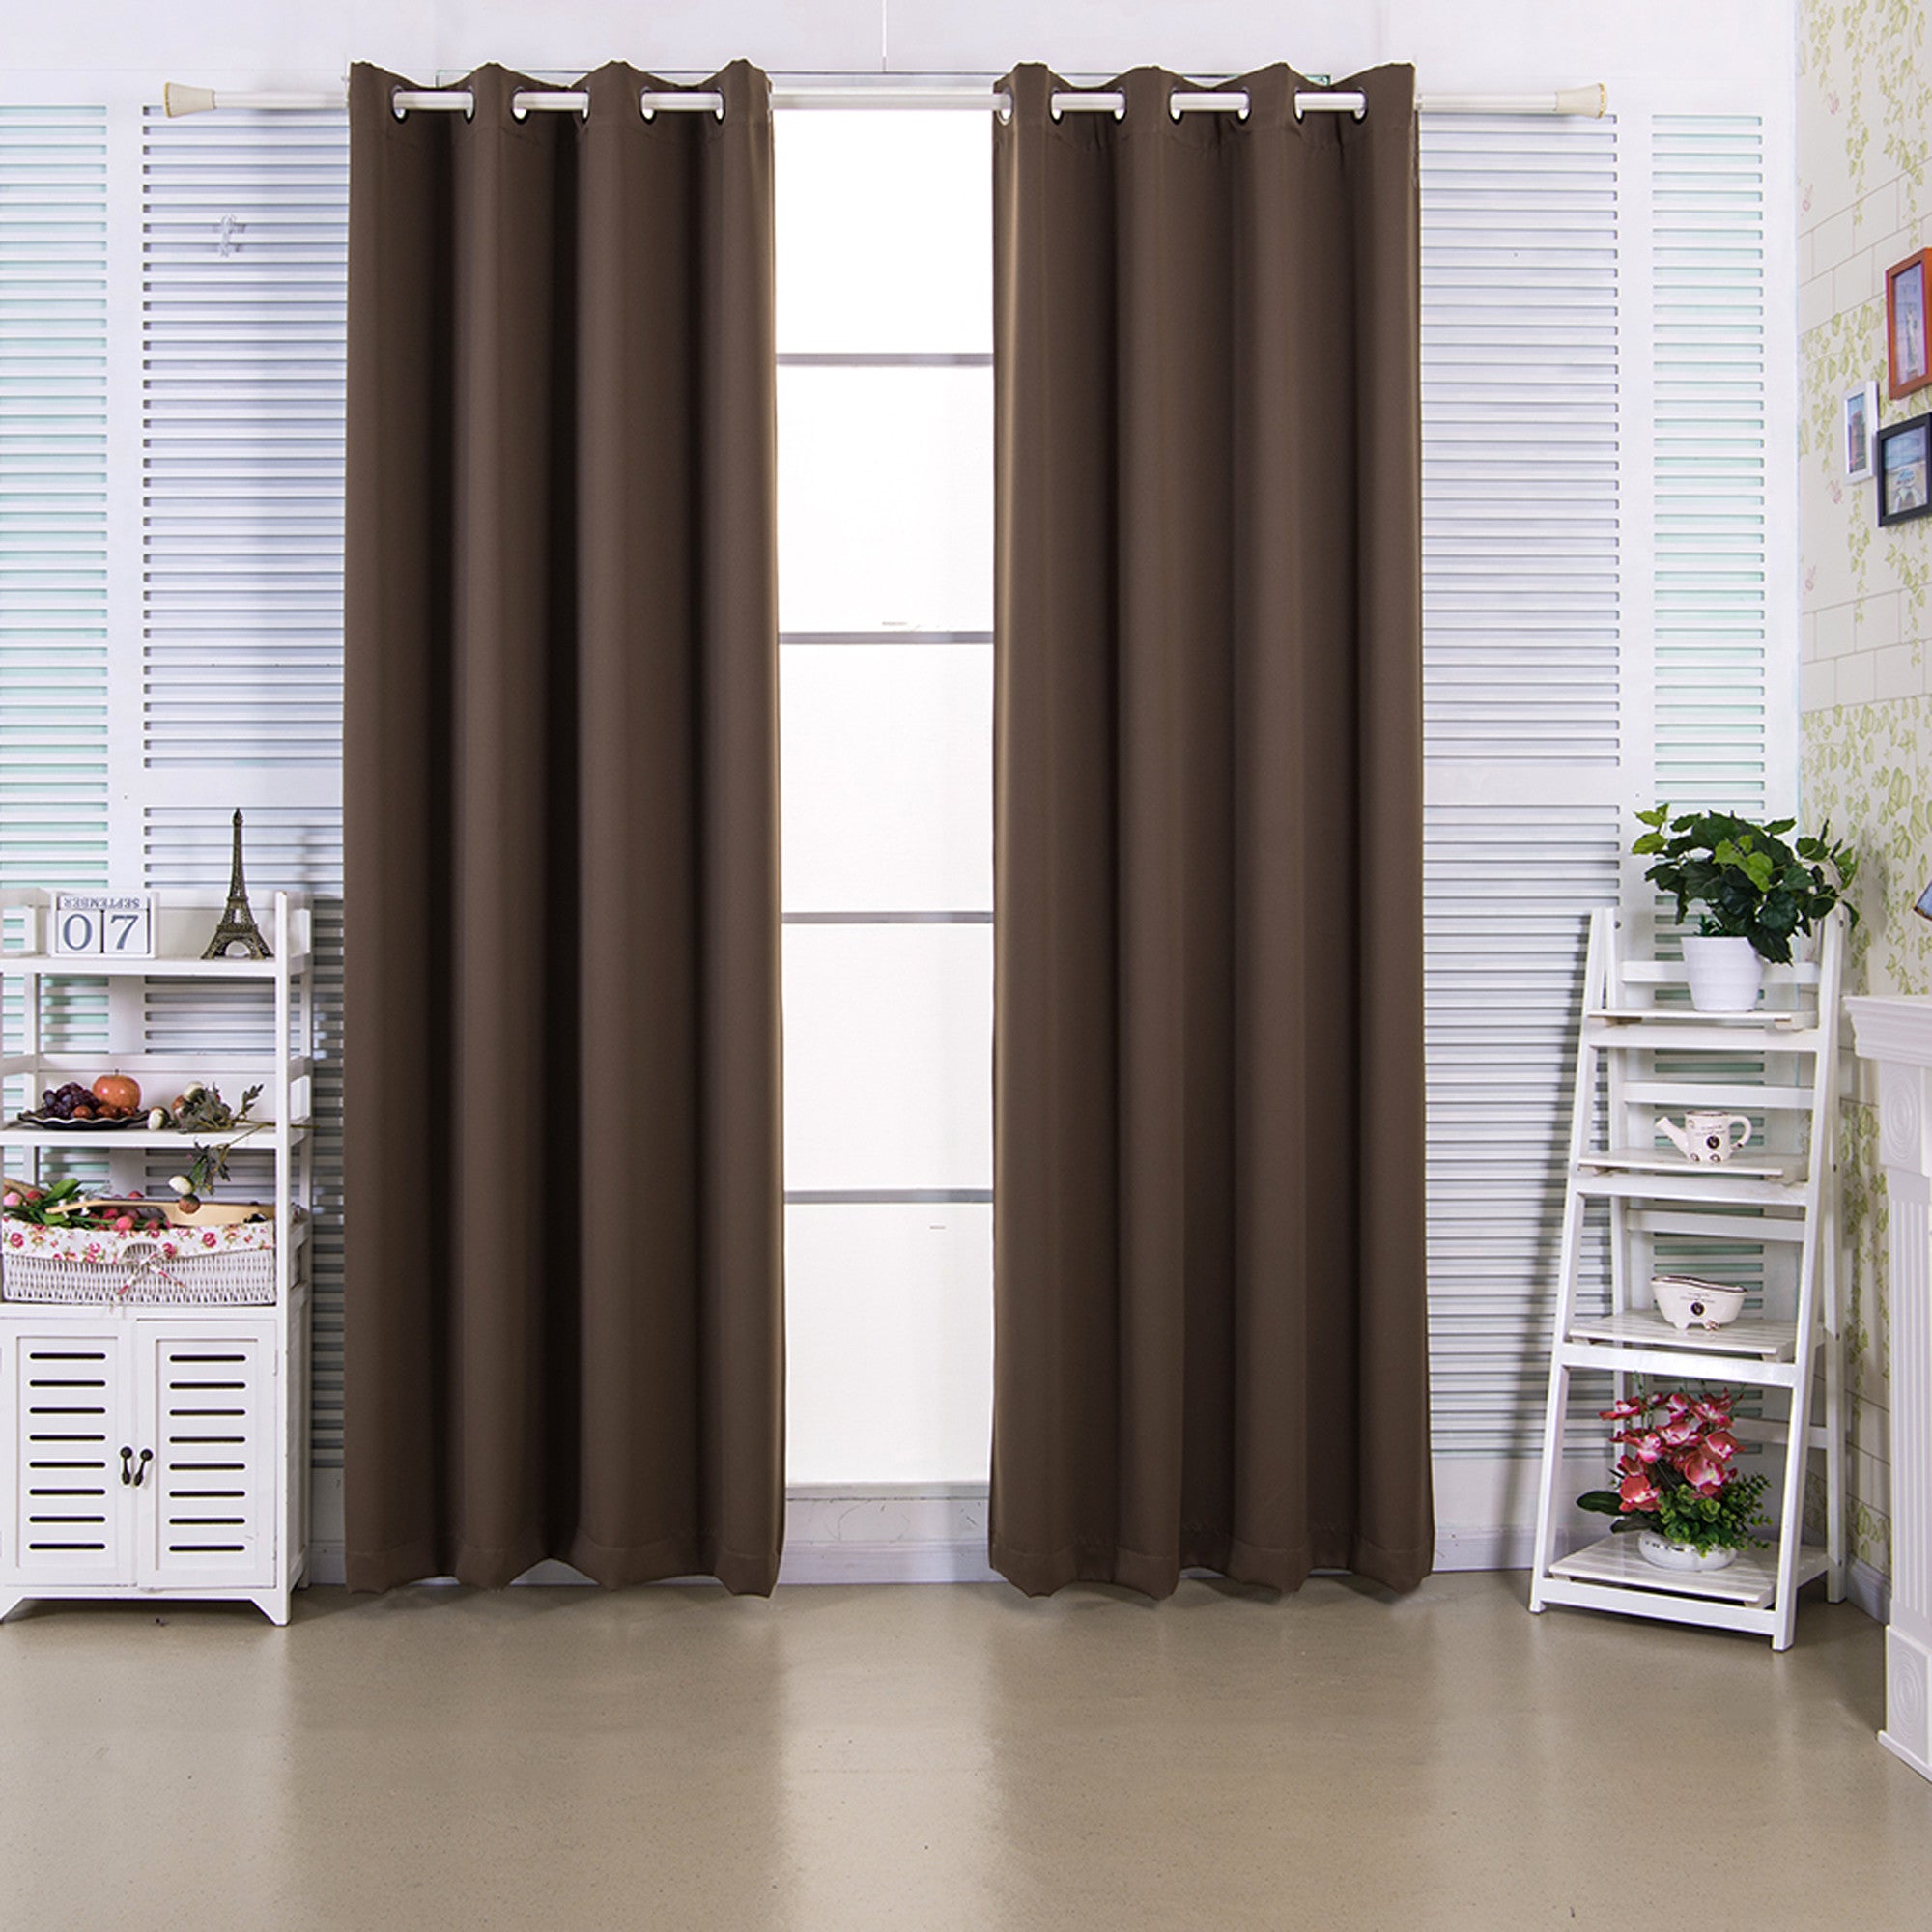 Teamson Home 72" Edessa Premium Solid Insulated Thermal Blackout Window Curtain Panels with Grommets, Hazelnut Brown